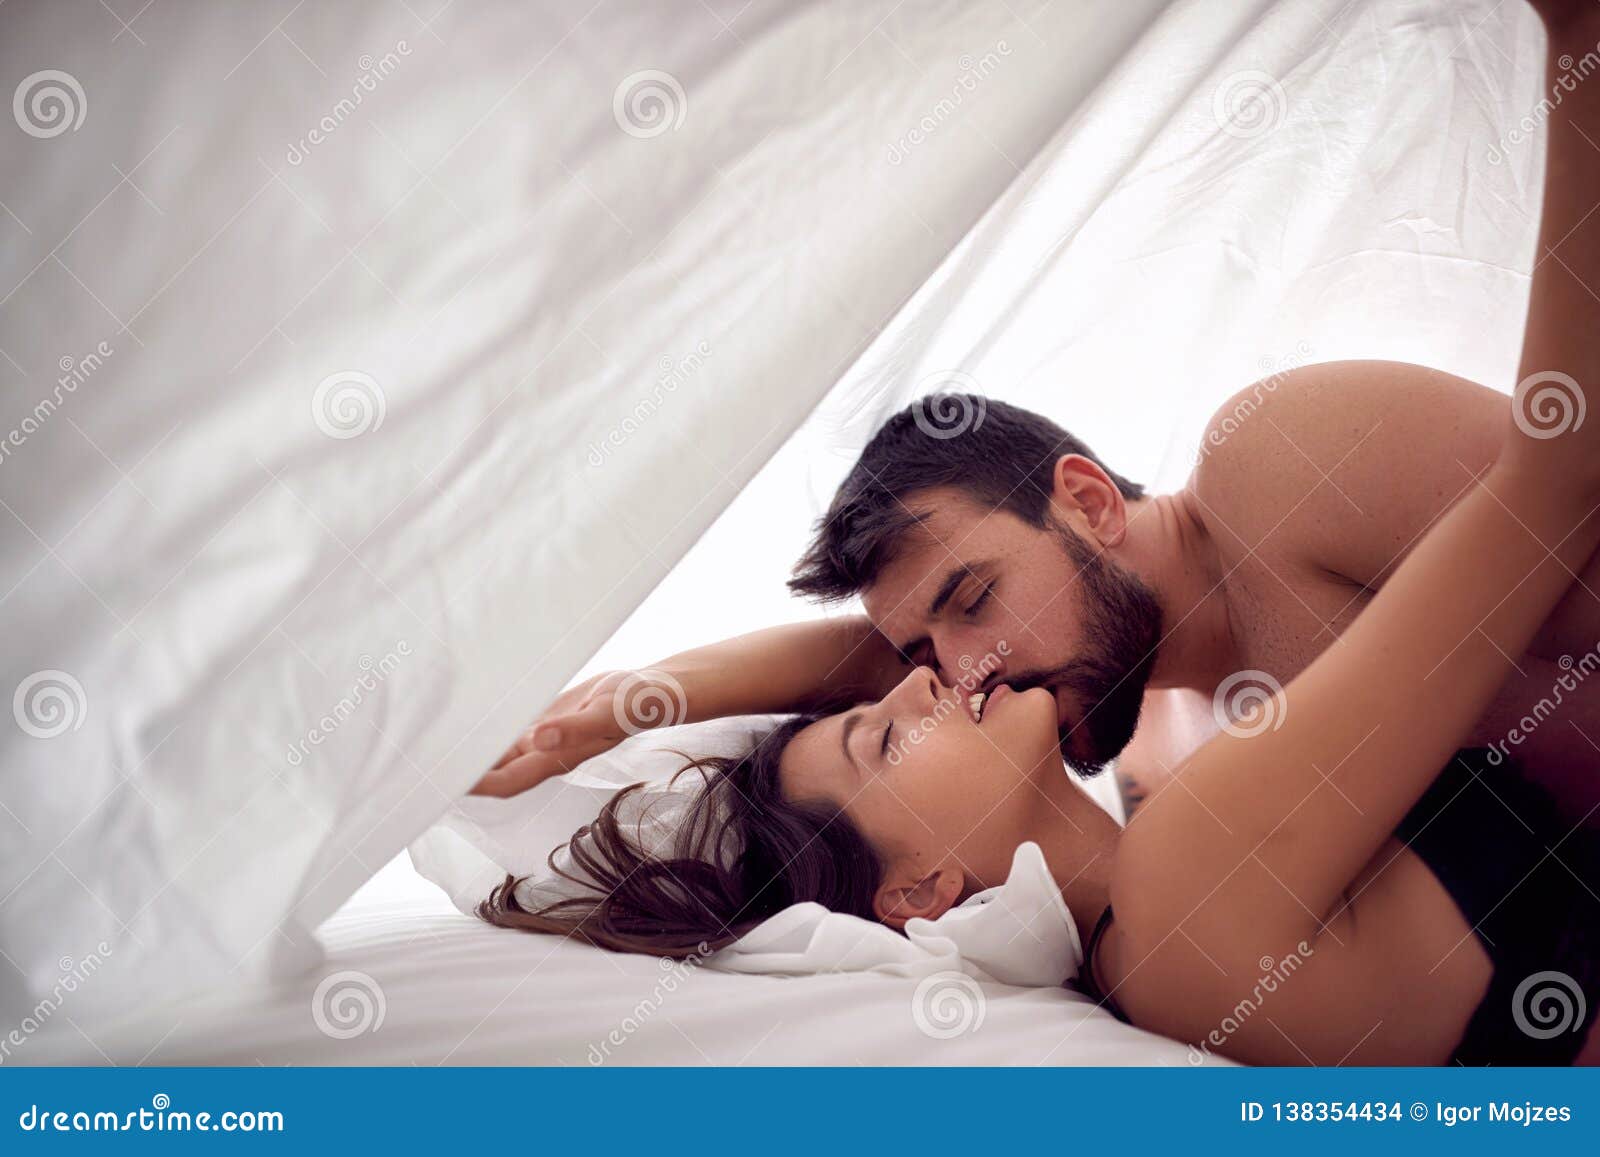 Couple Lovers Having Sex on a Bed in Morning with Lust and Love picture picture